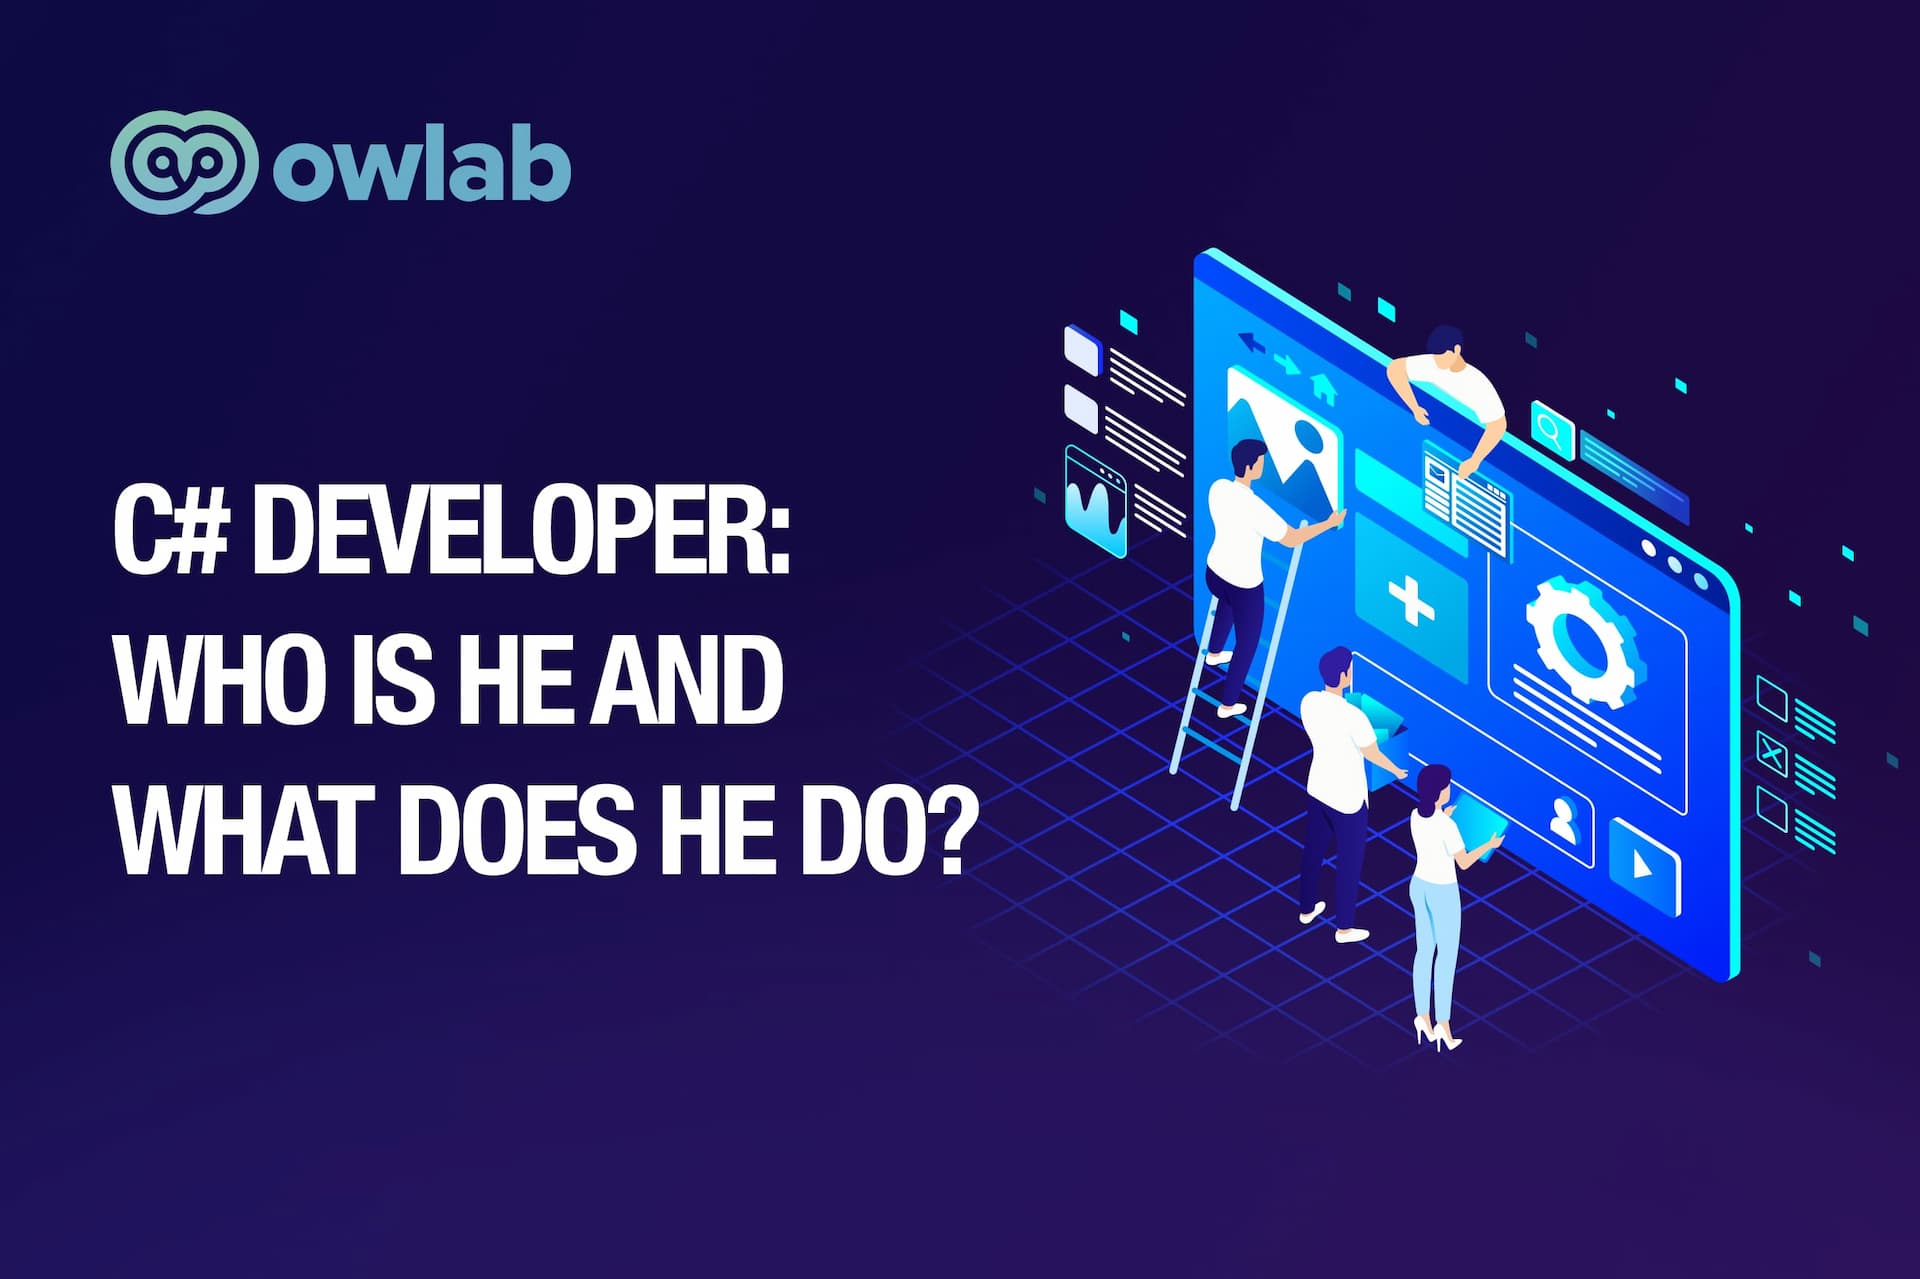 C# Developer: Who is He and What Does He Do?